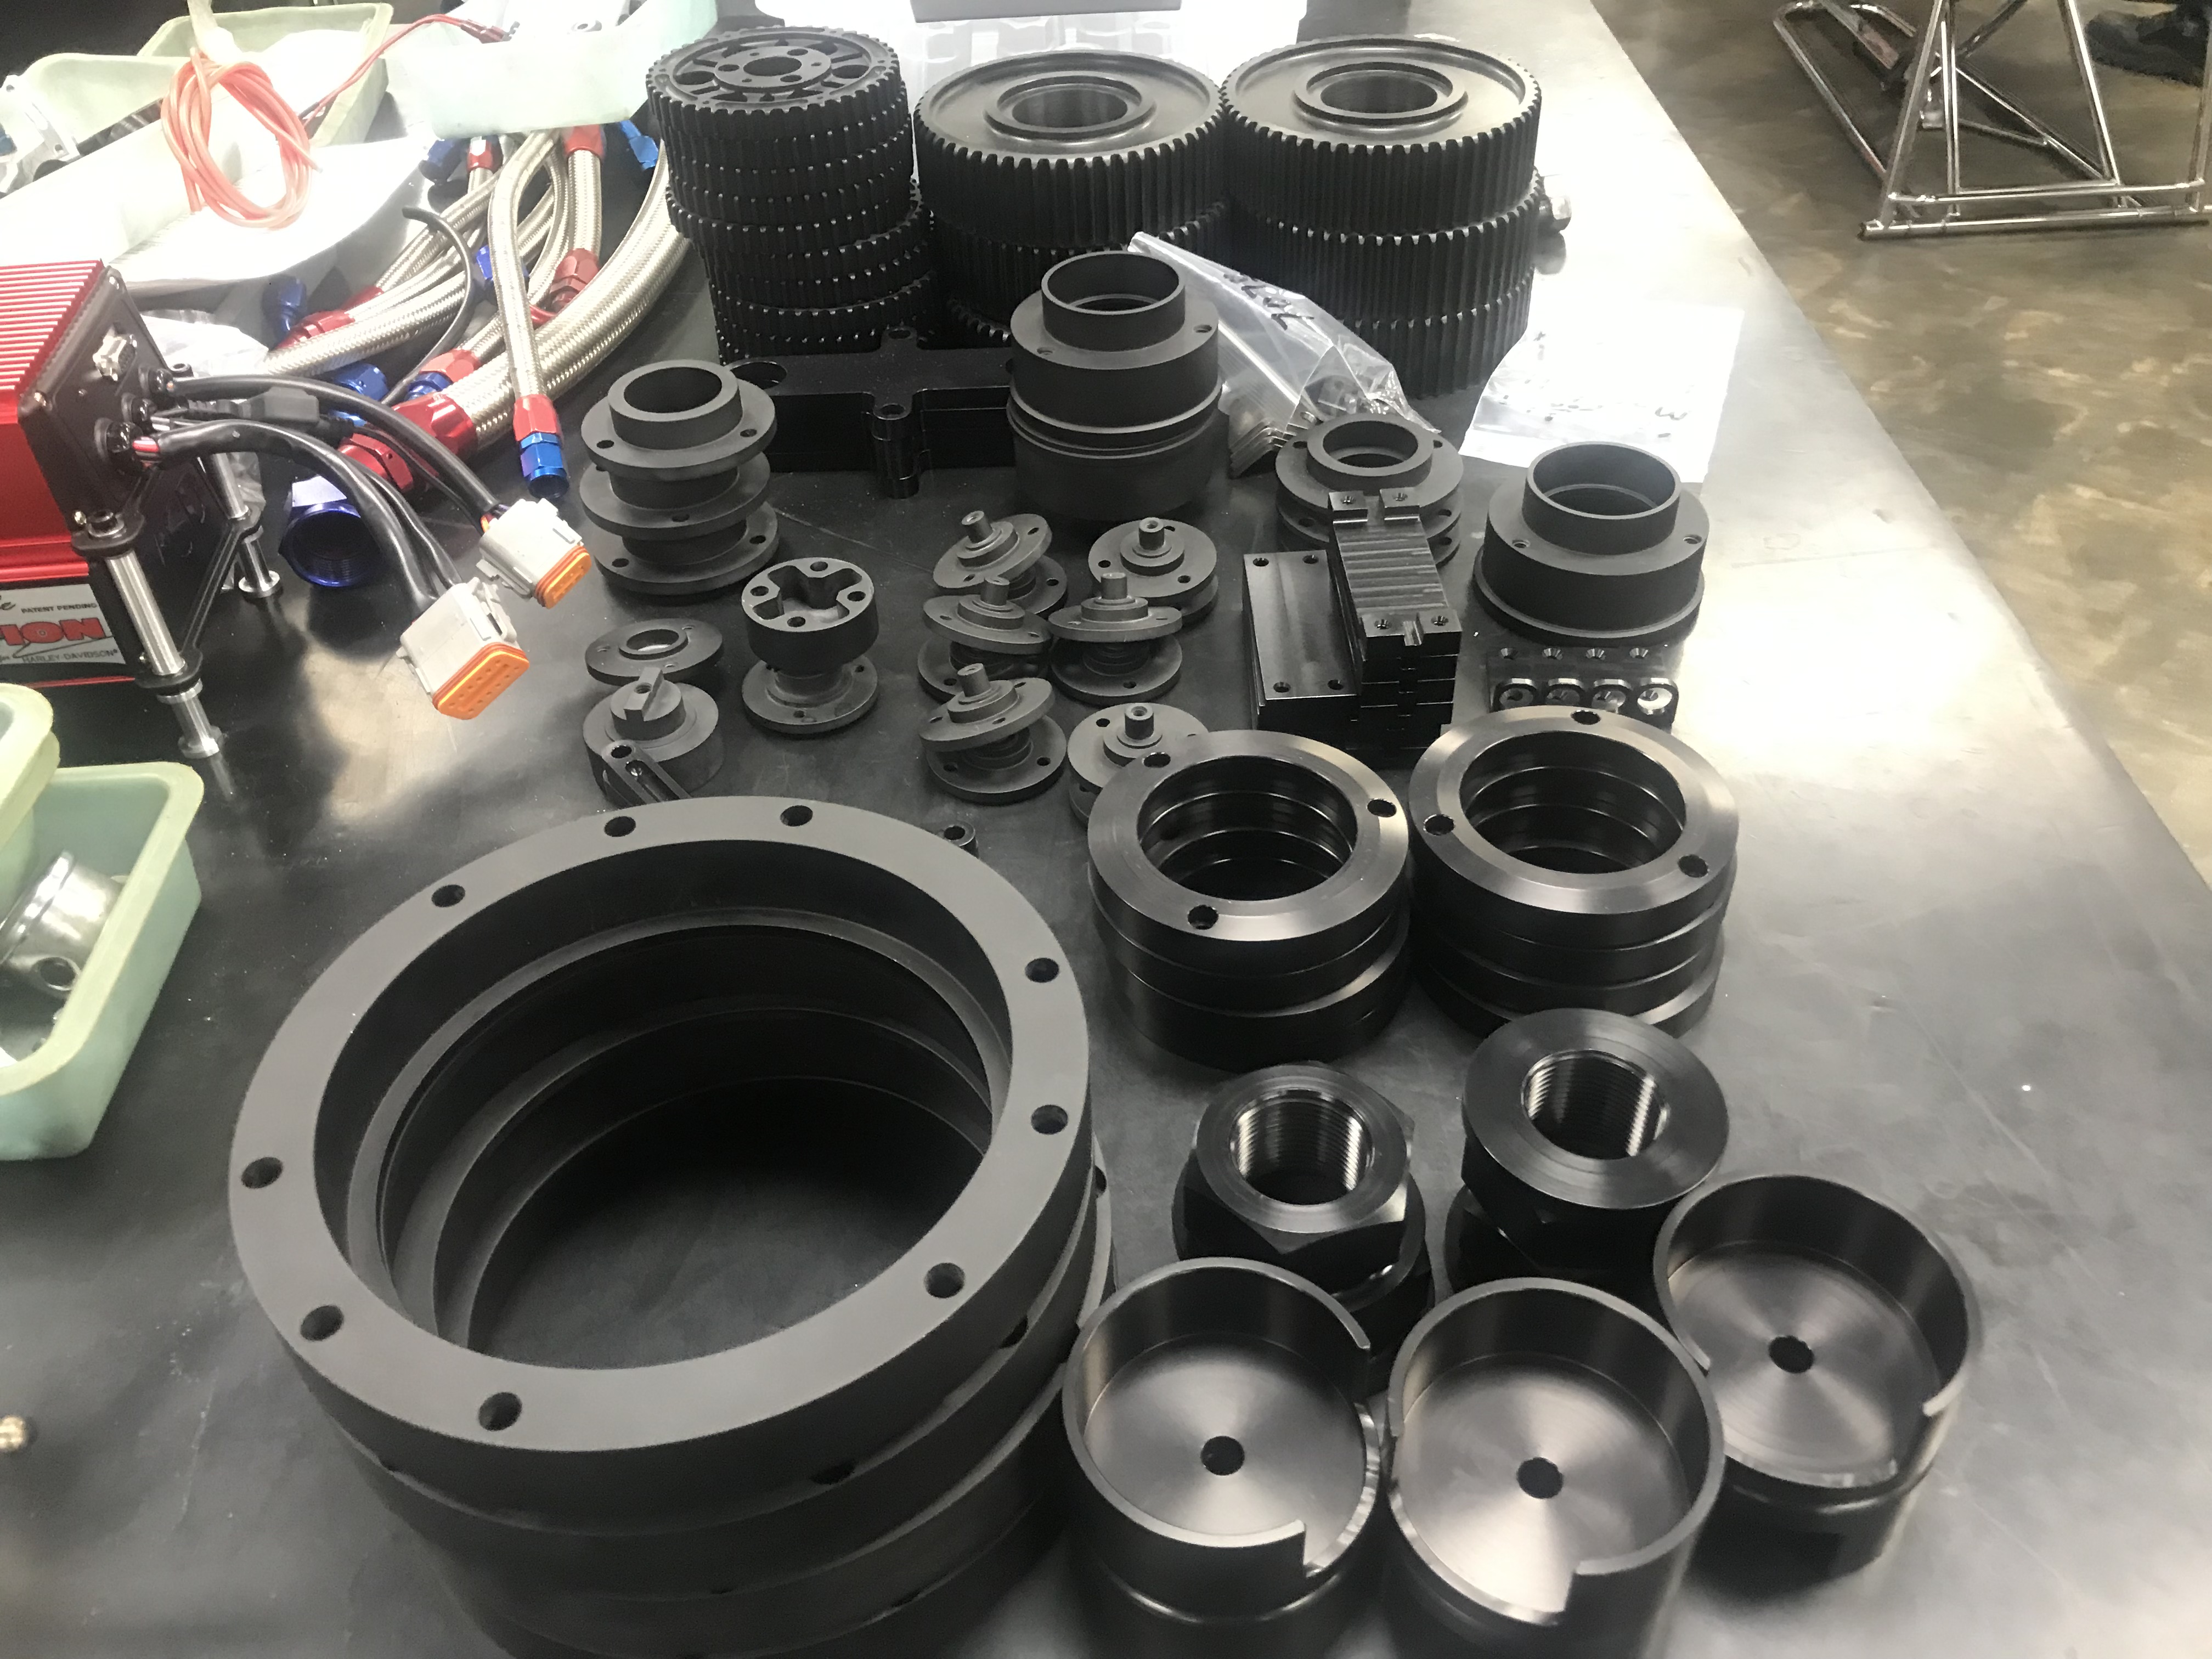 Top Fuel Motorcycle Hard Coated Parts